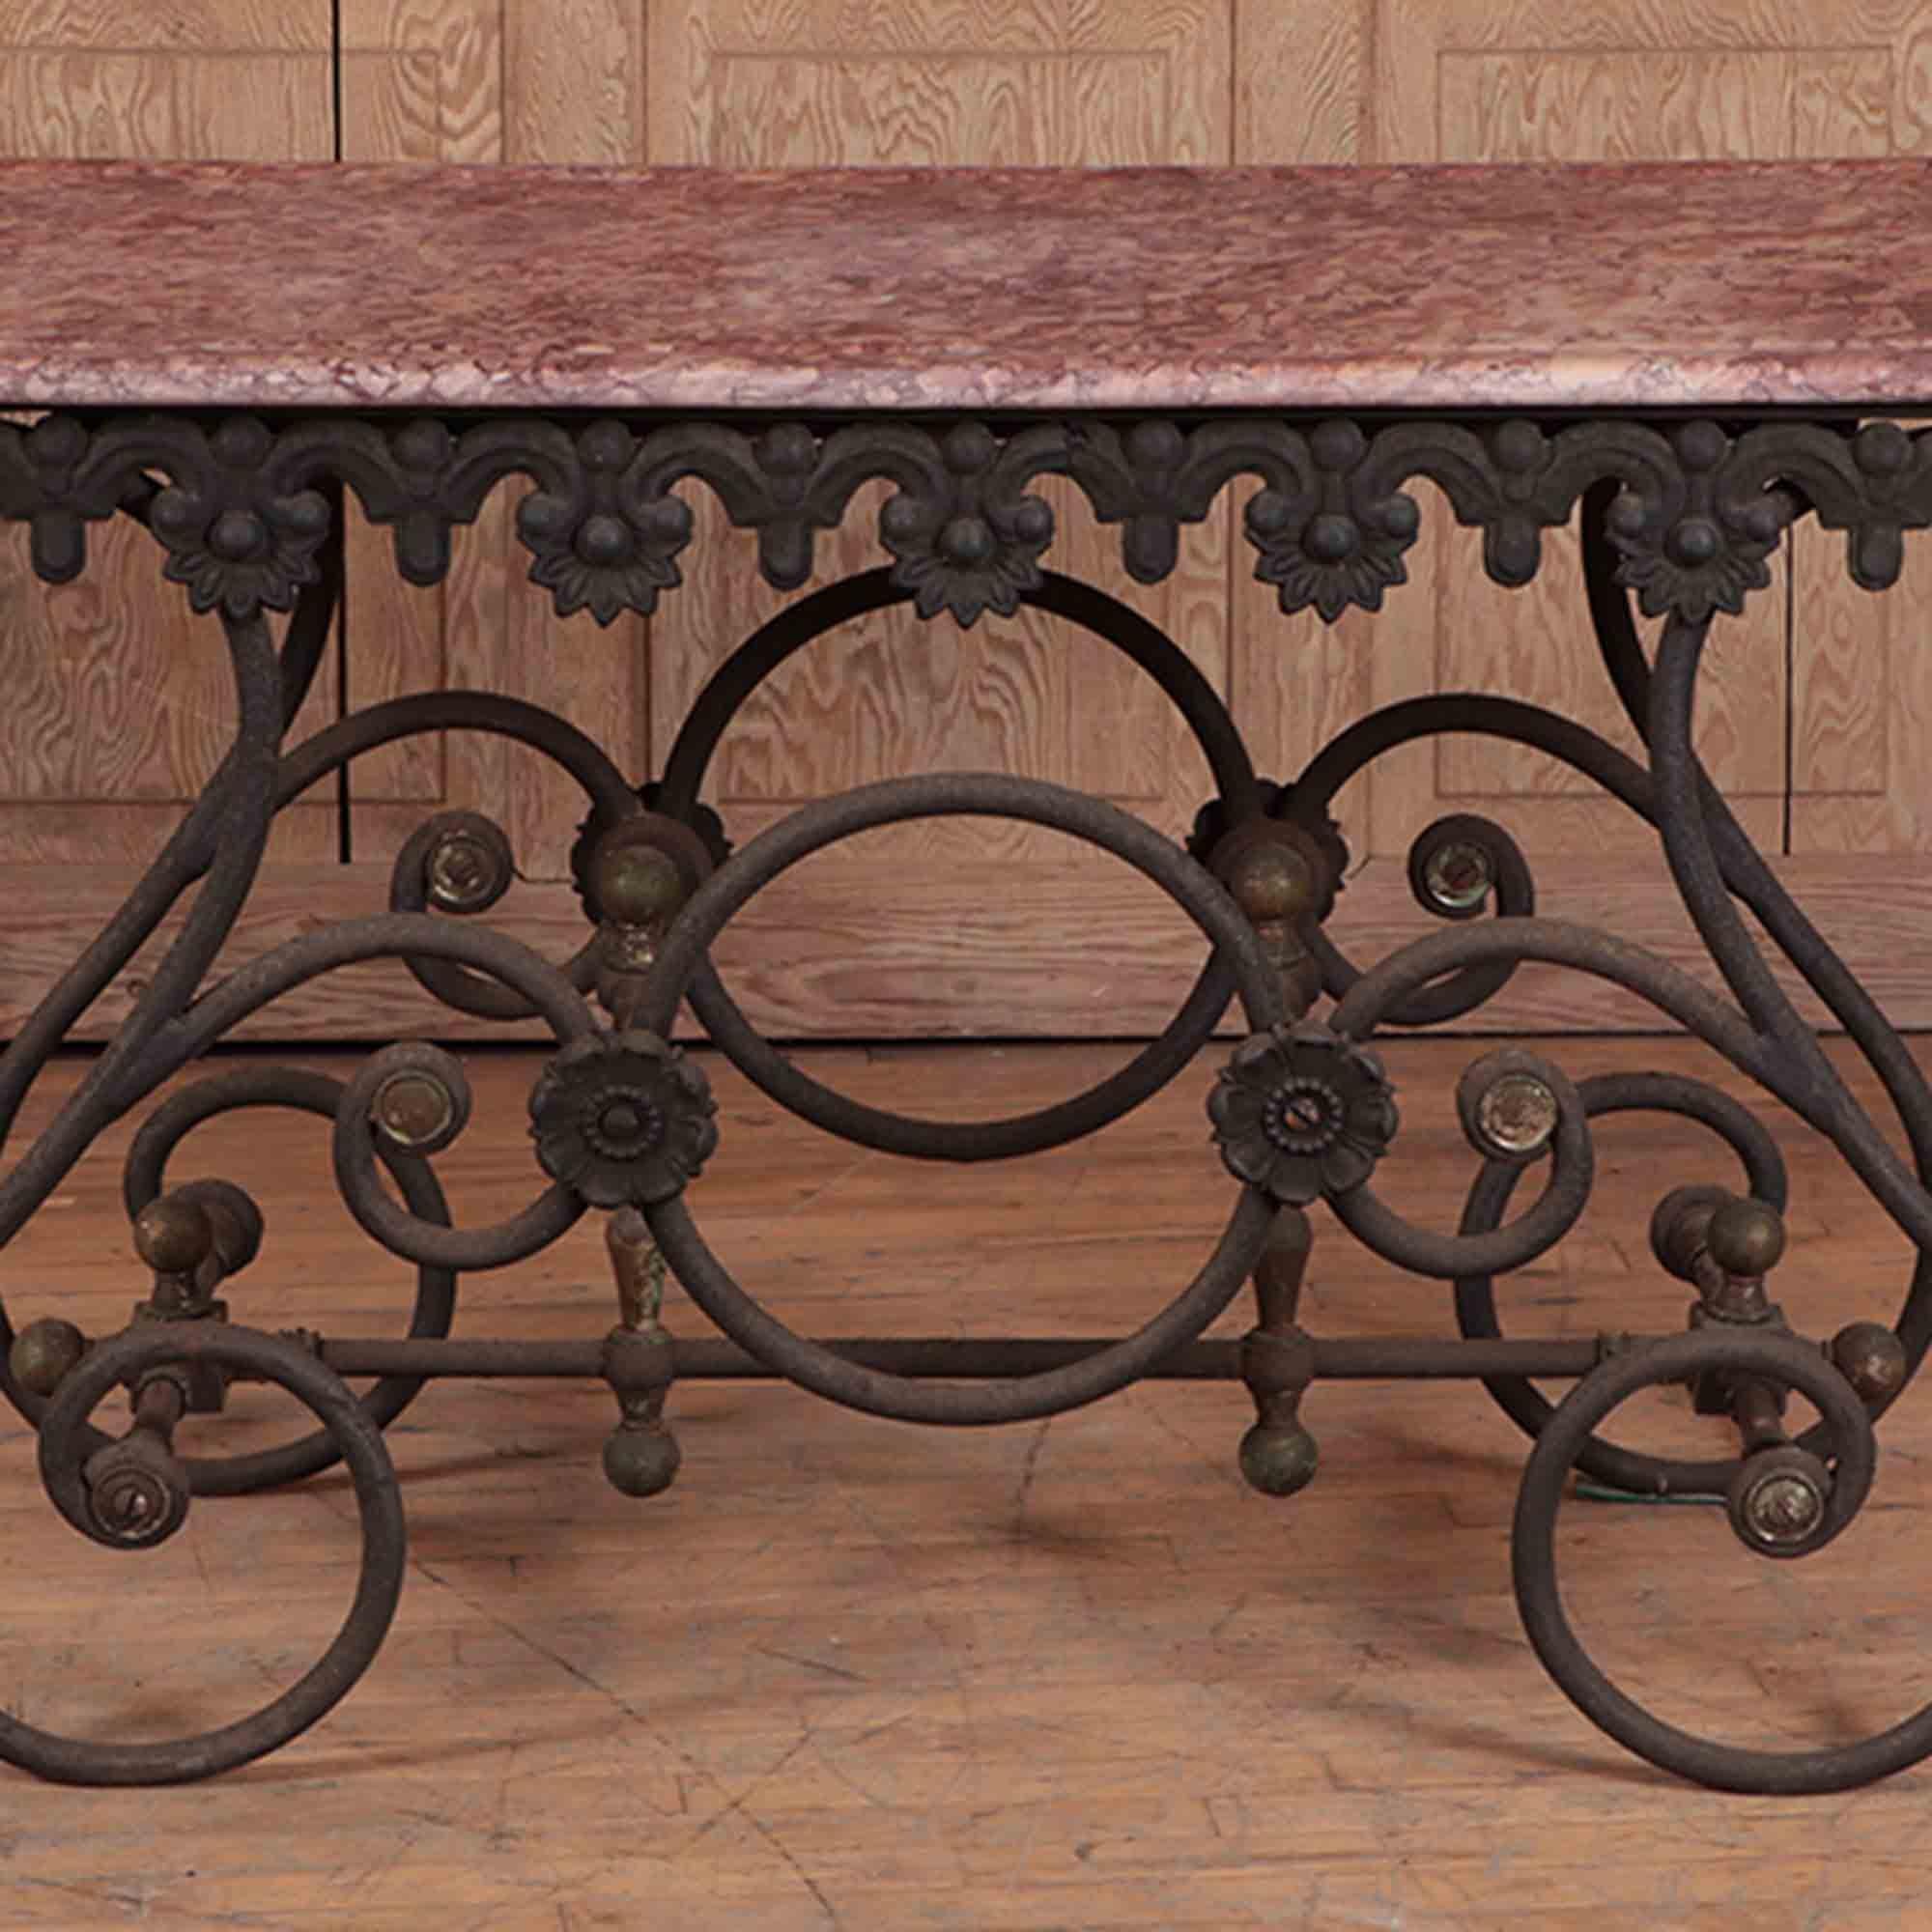 A French cast iron and marble bakers table with decorative floral details around the perimeter and finials in each corner. Ball finials decorate the joints on the stretchers underneath. Early 20th century.